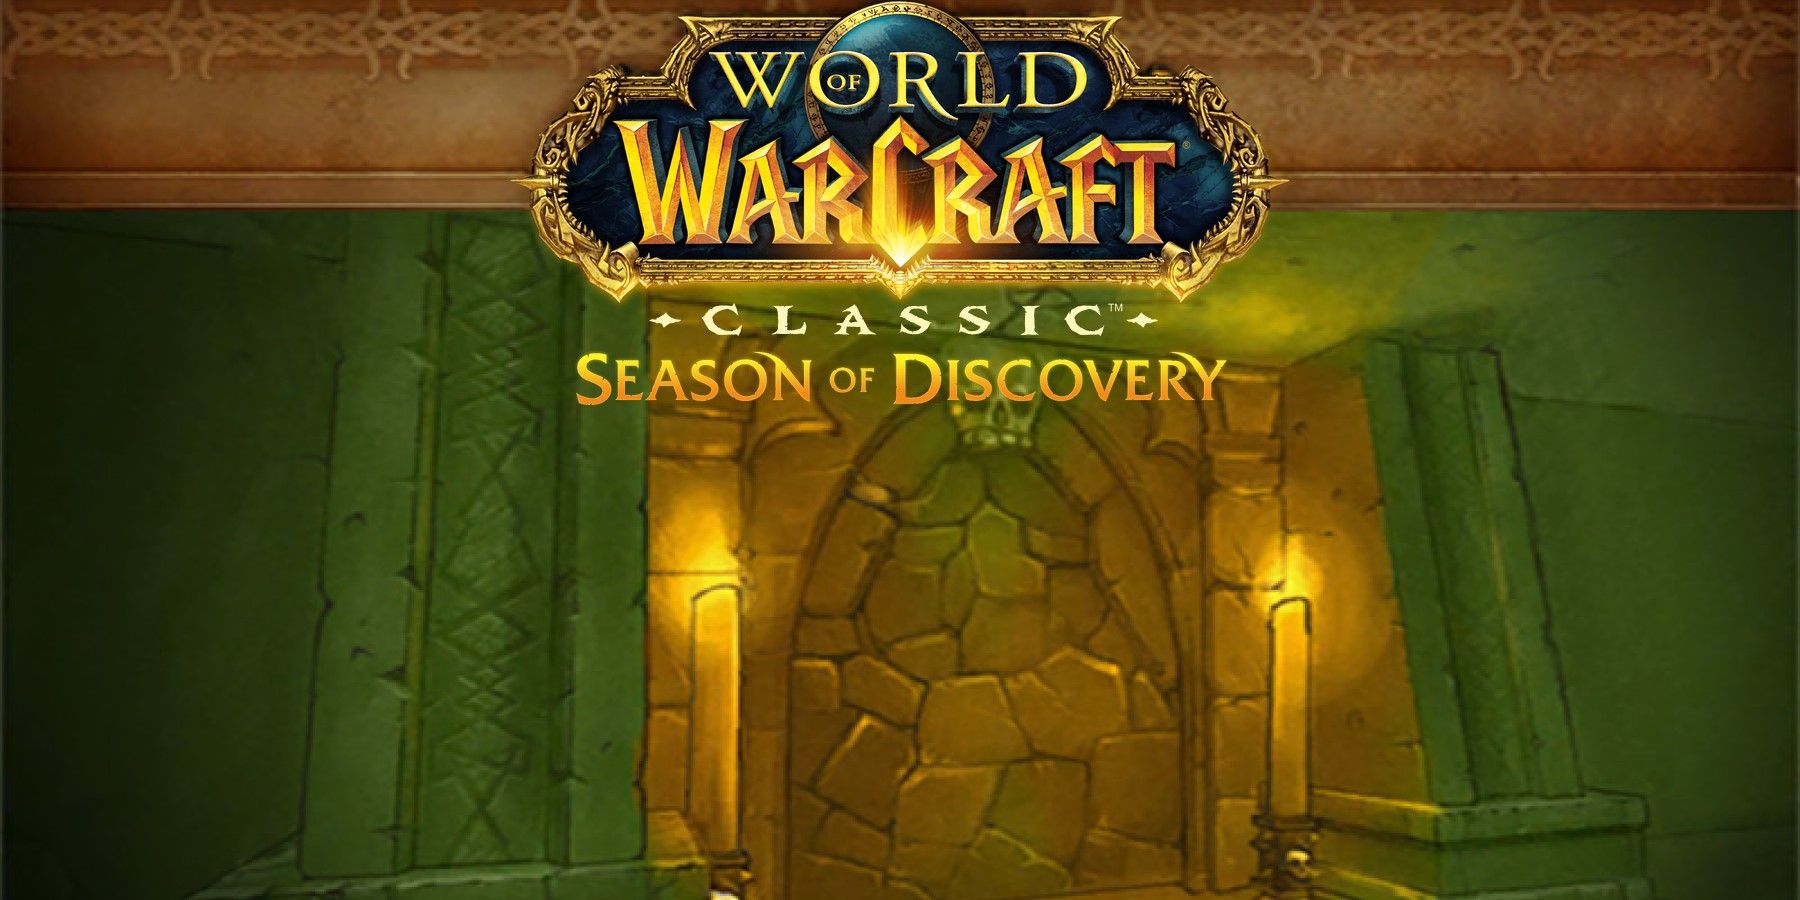 WoW Classic Previews Sunken Temple Raid for Season of Discovery Phase 3